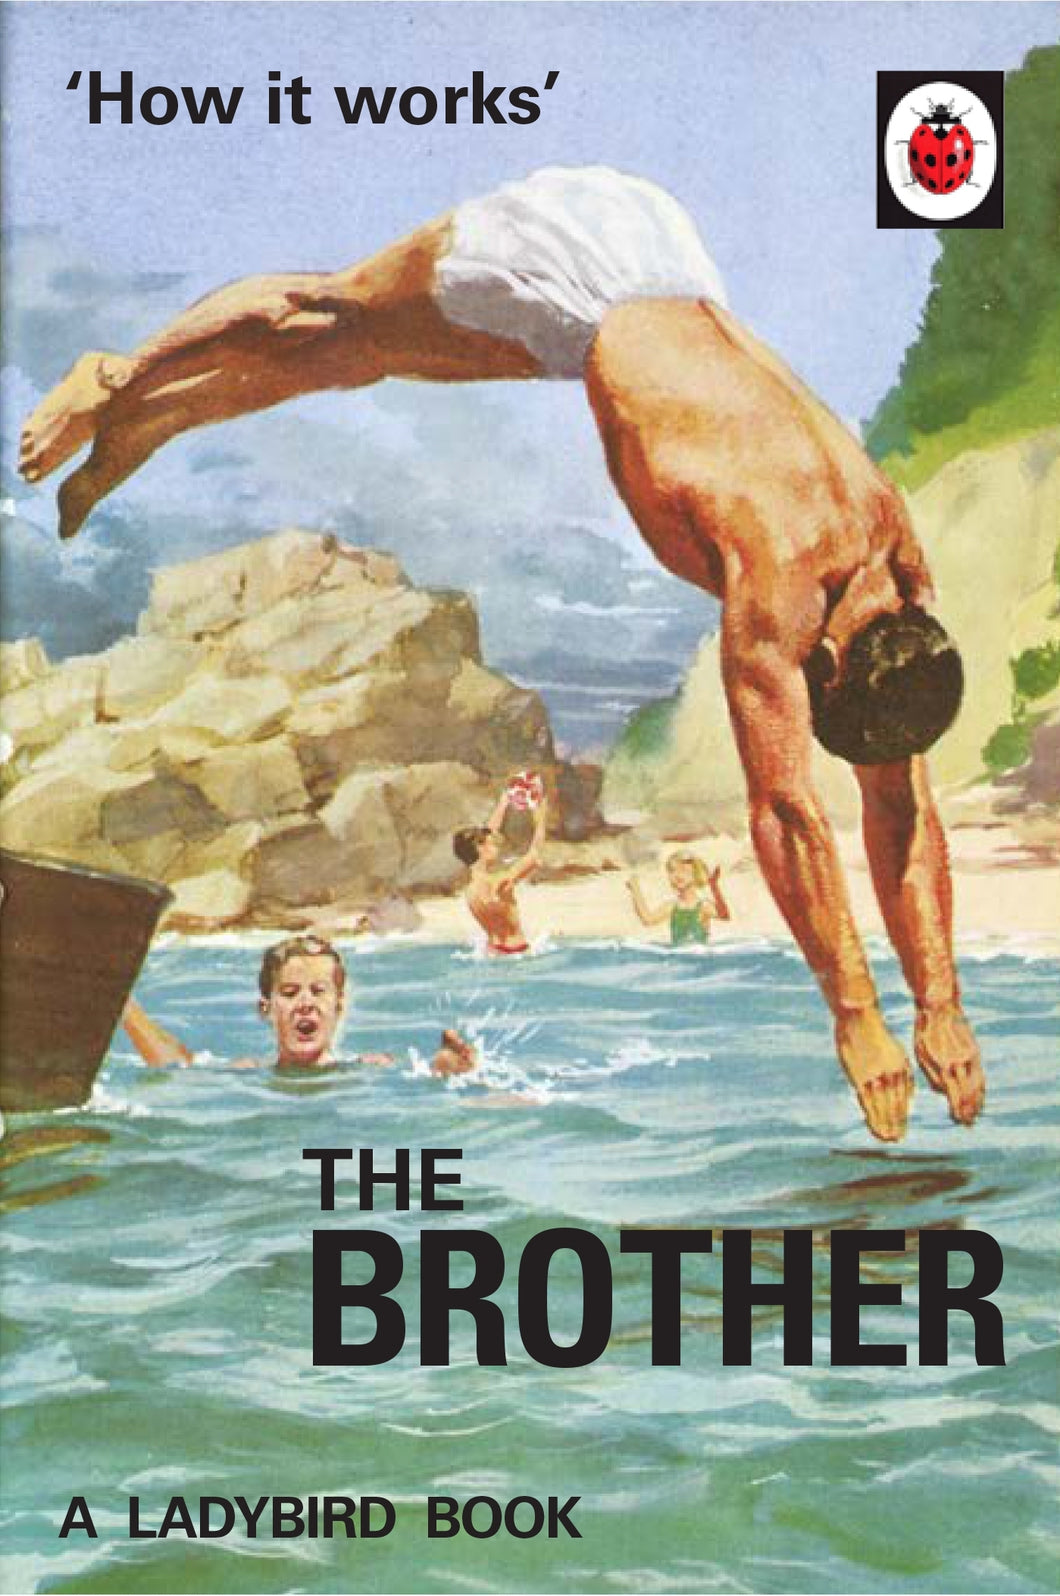 Ladybird Book - The Brother